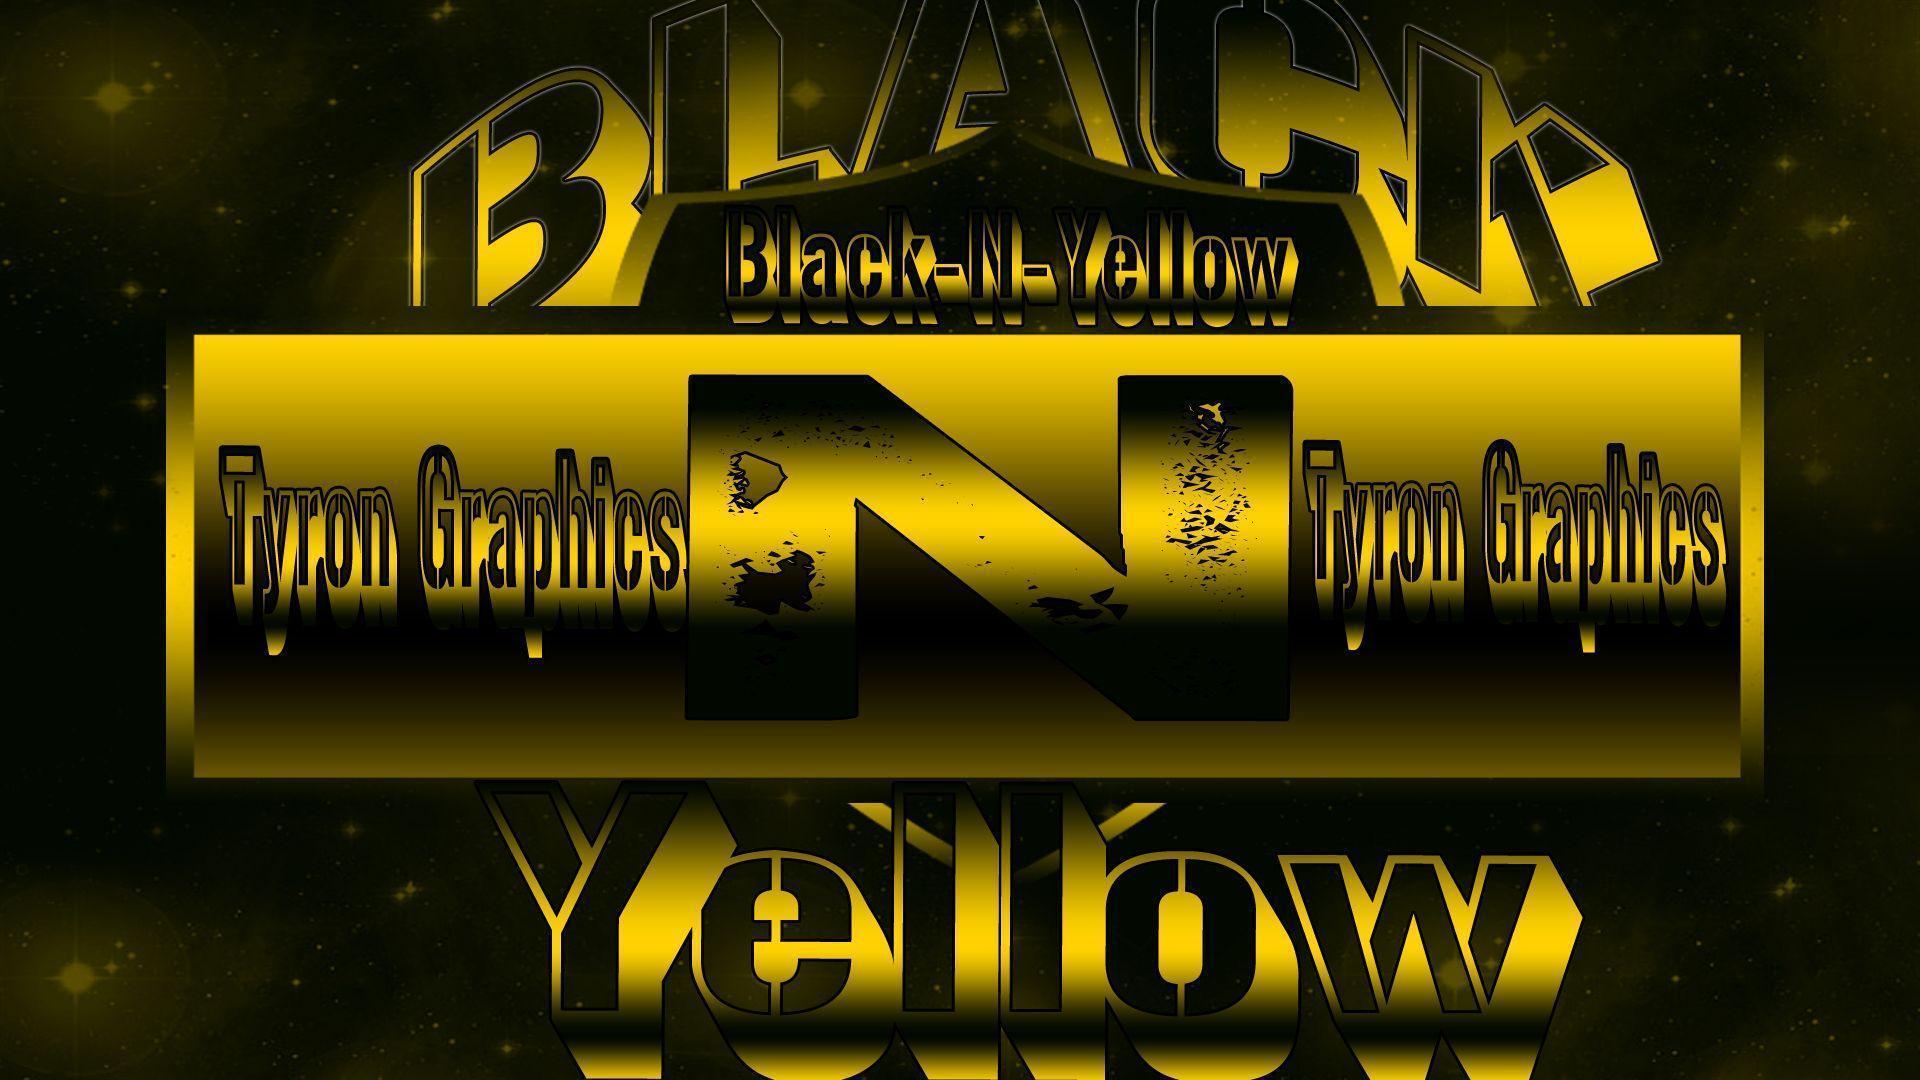 Hd Black And Yellow Wallpaper 9 Wide Wallpaper